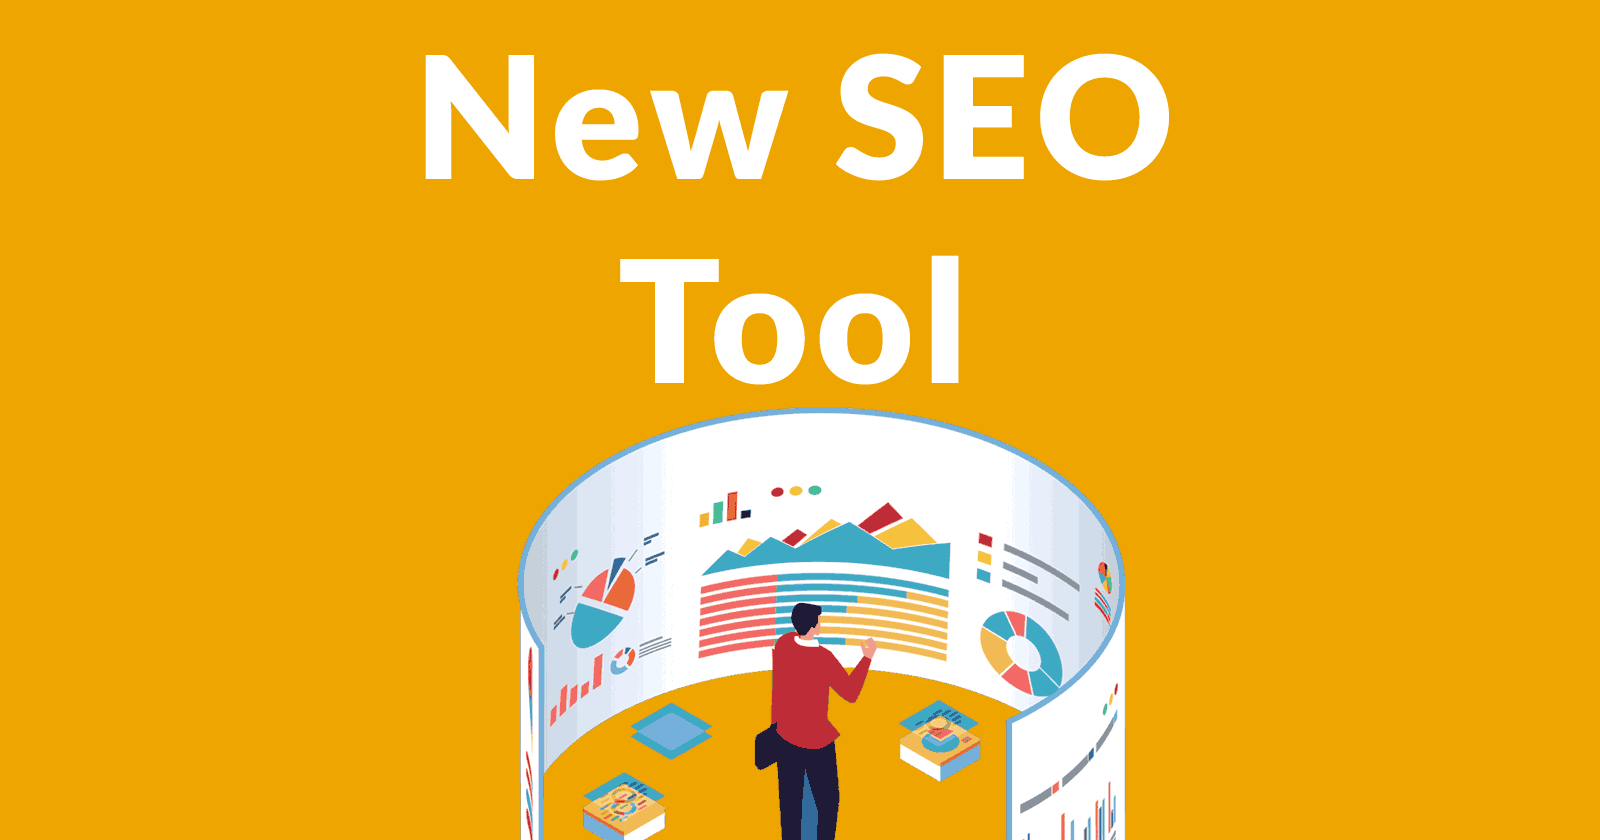 Fast or Slow SEO Tool